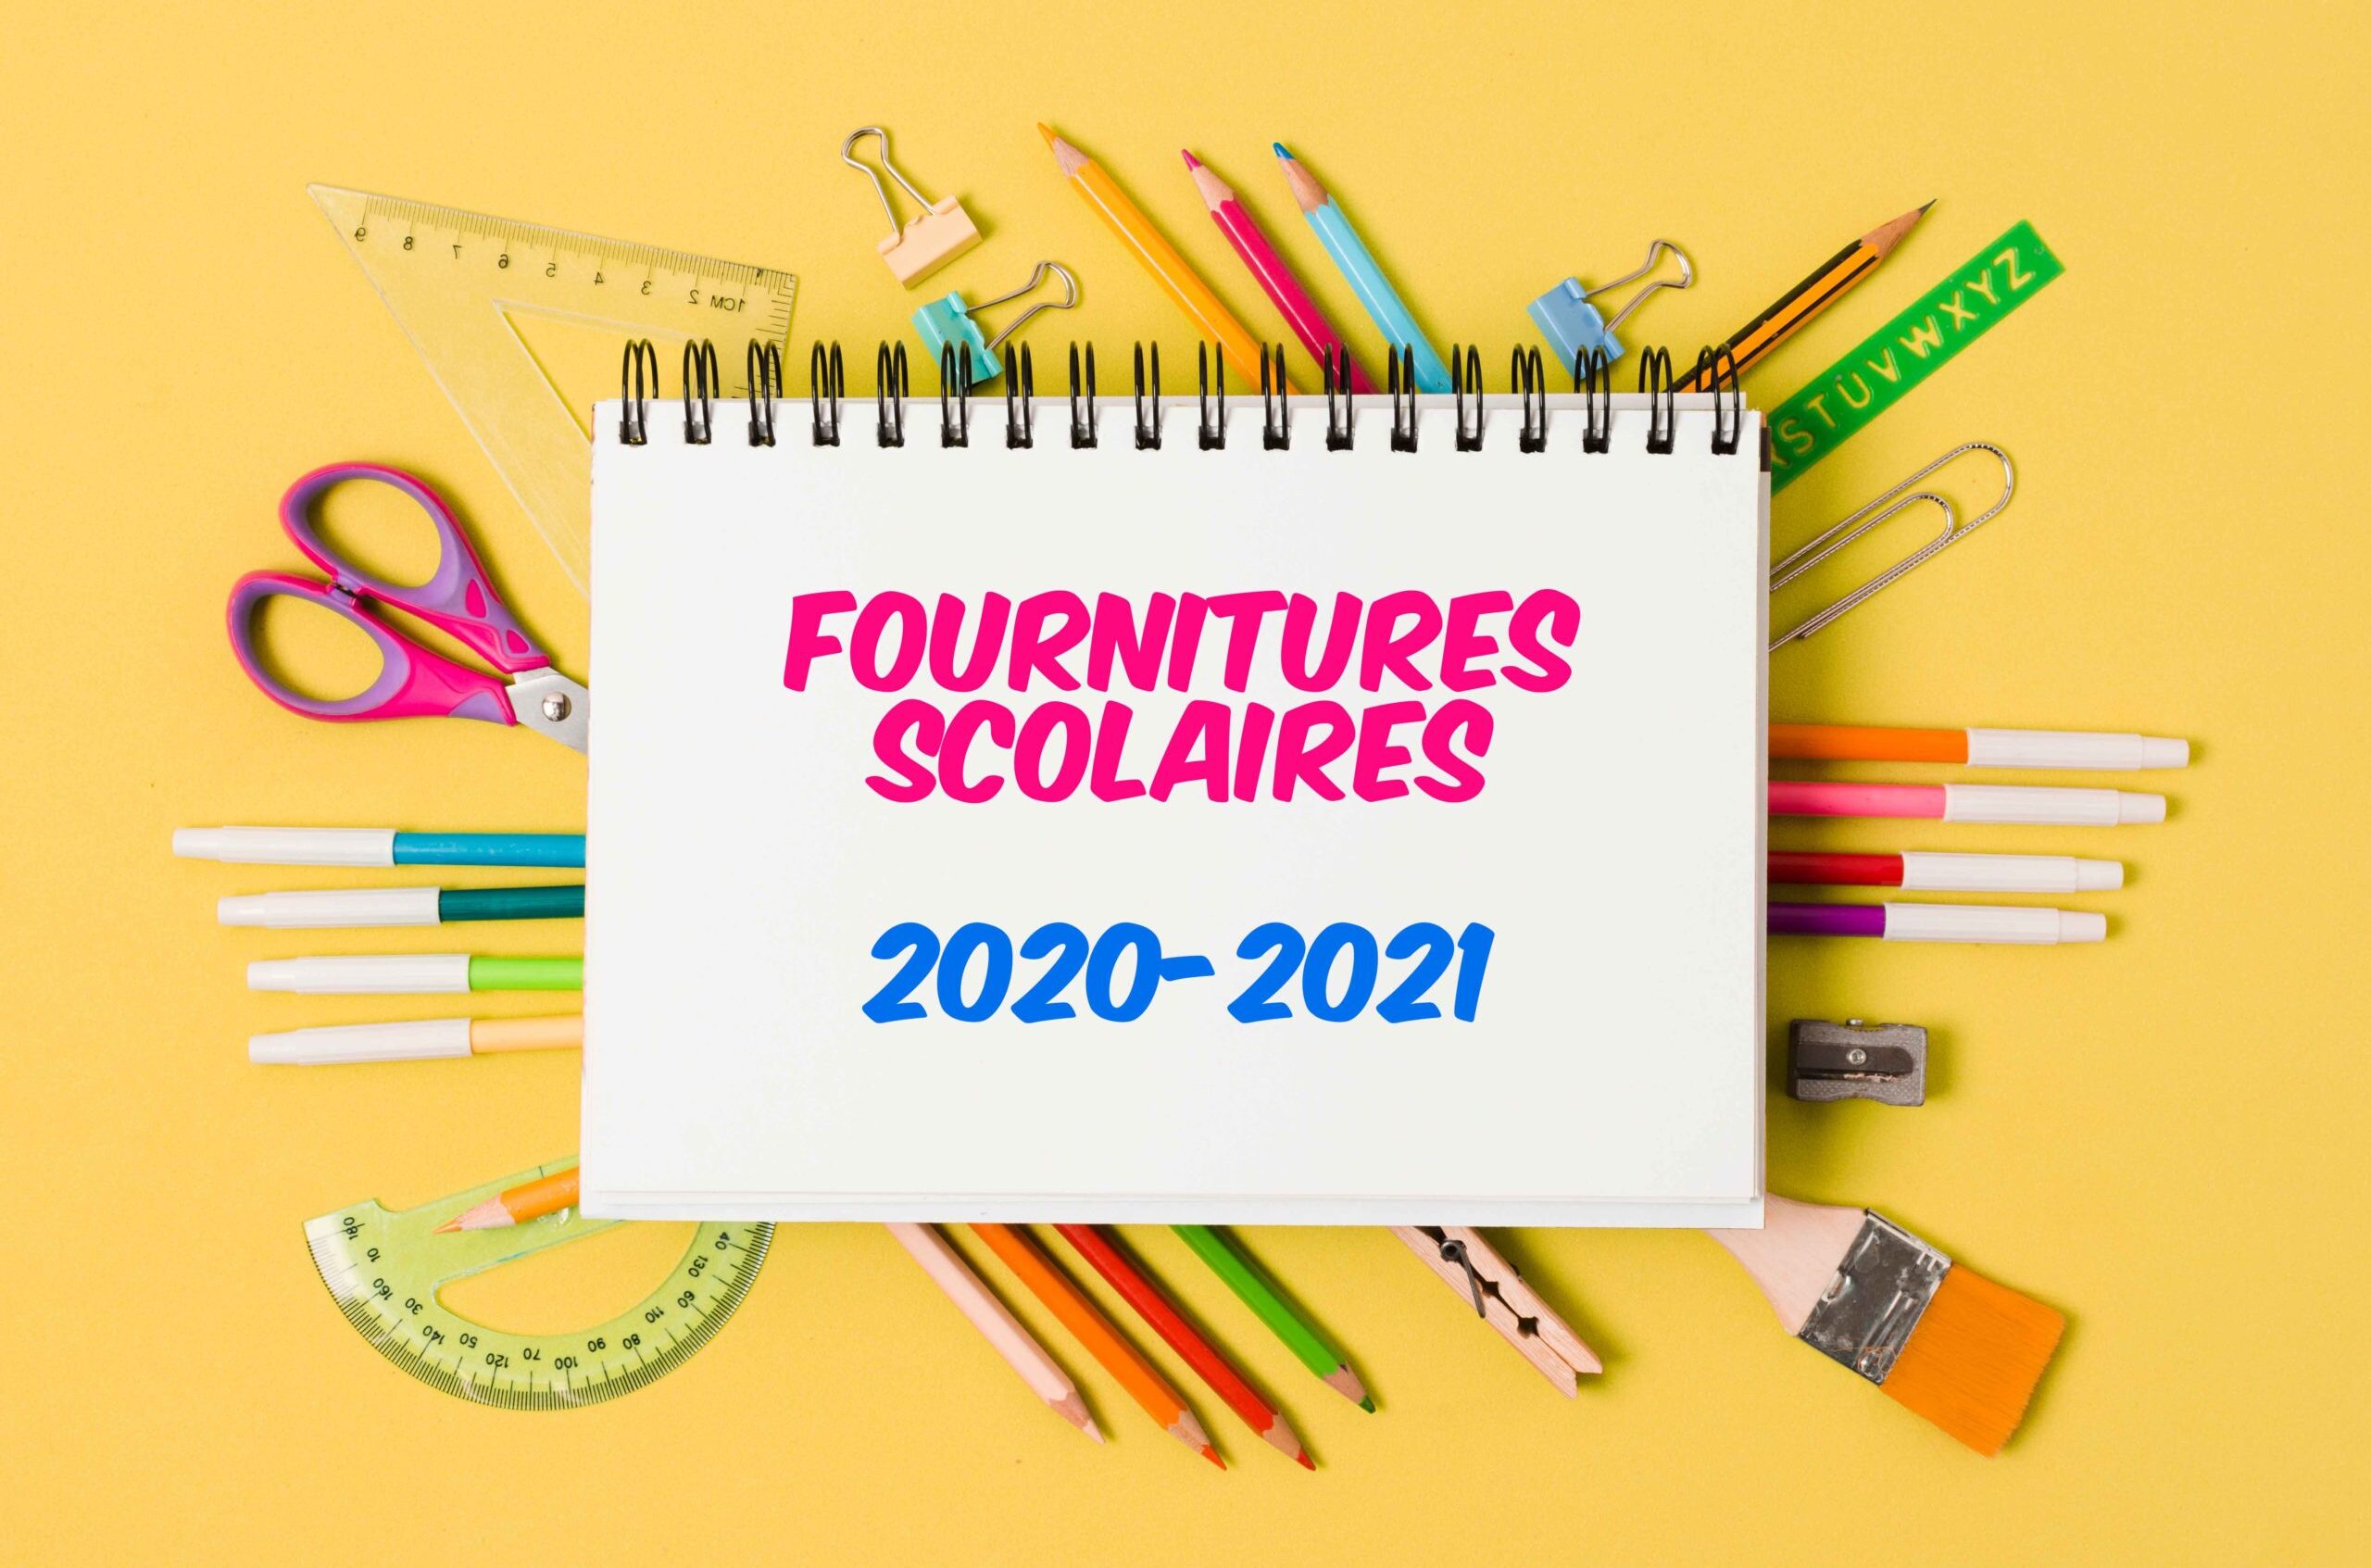 Fournitures-scolaires-2020-2021-scaled.jpg